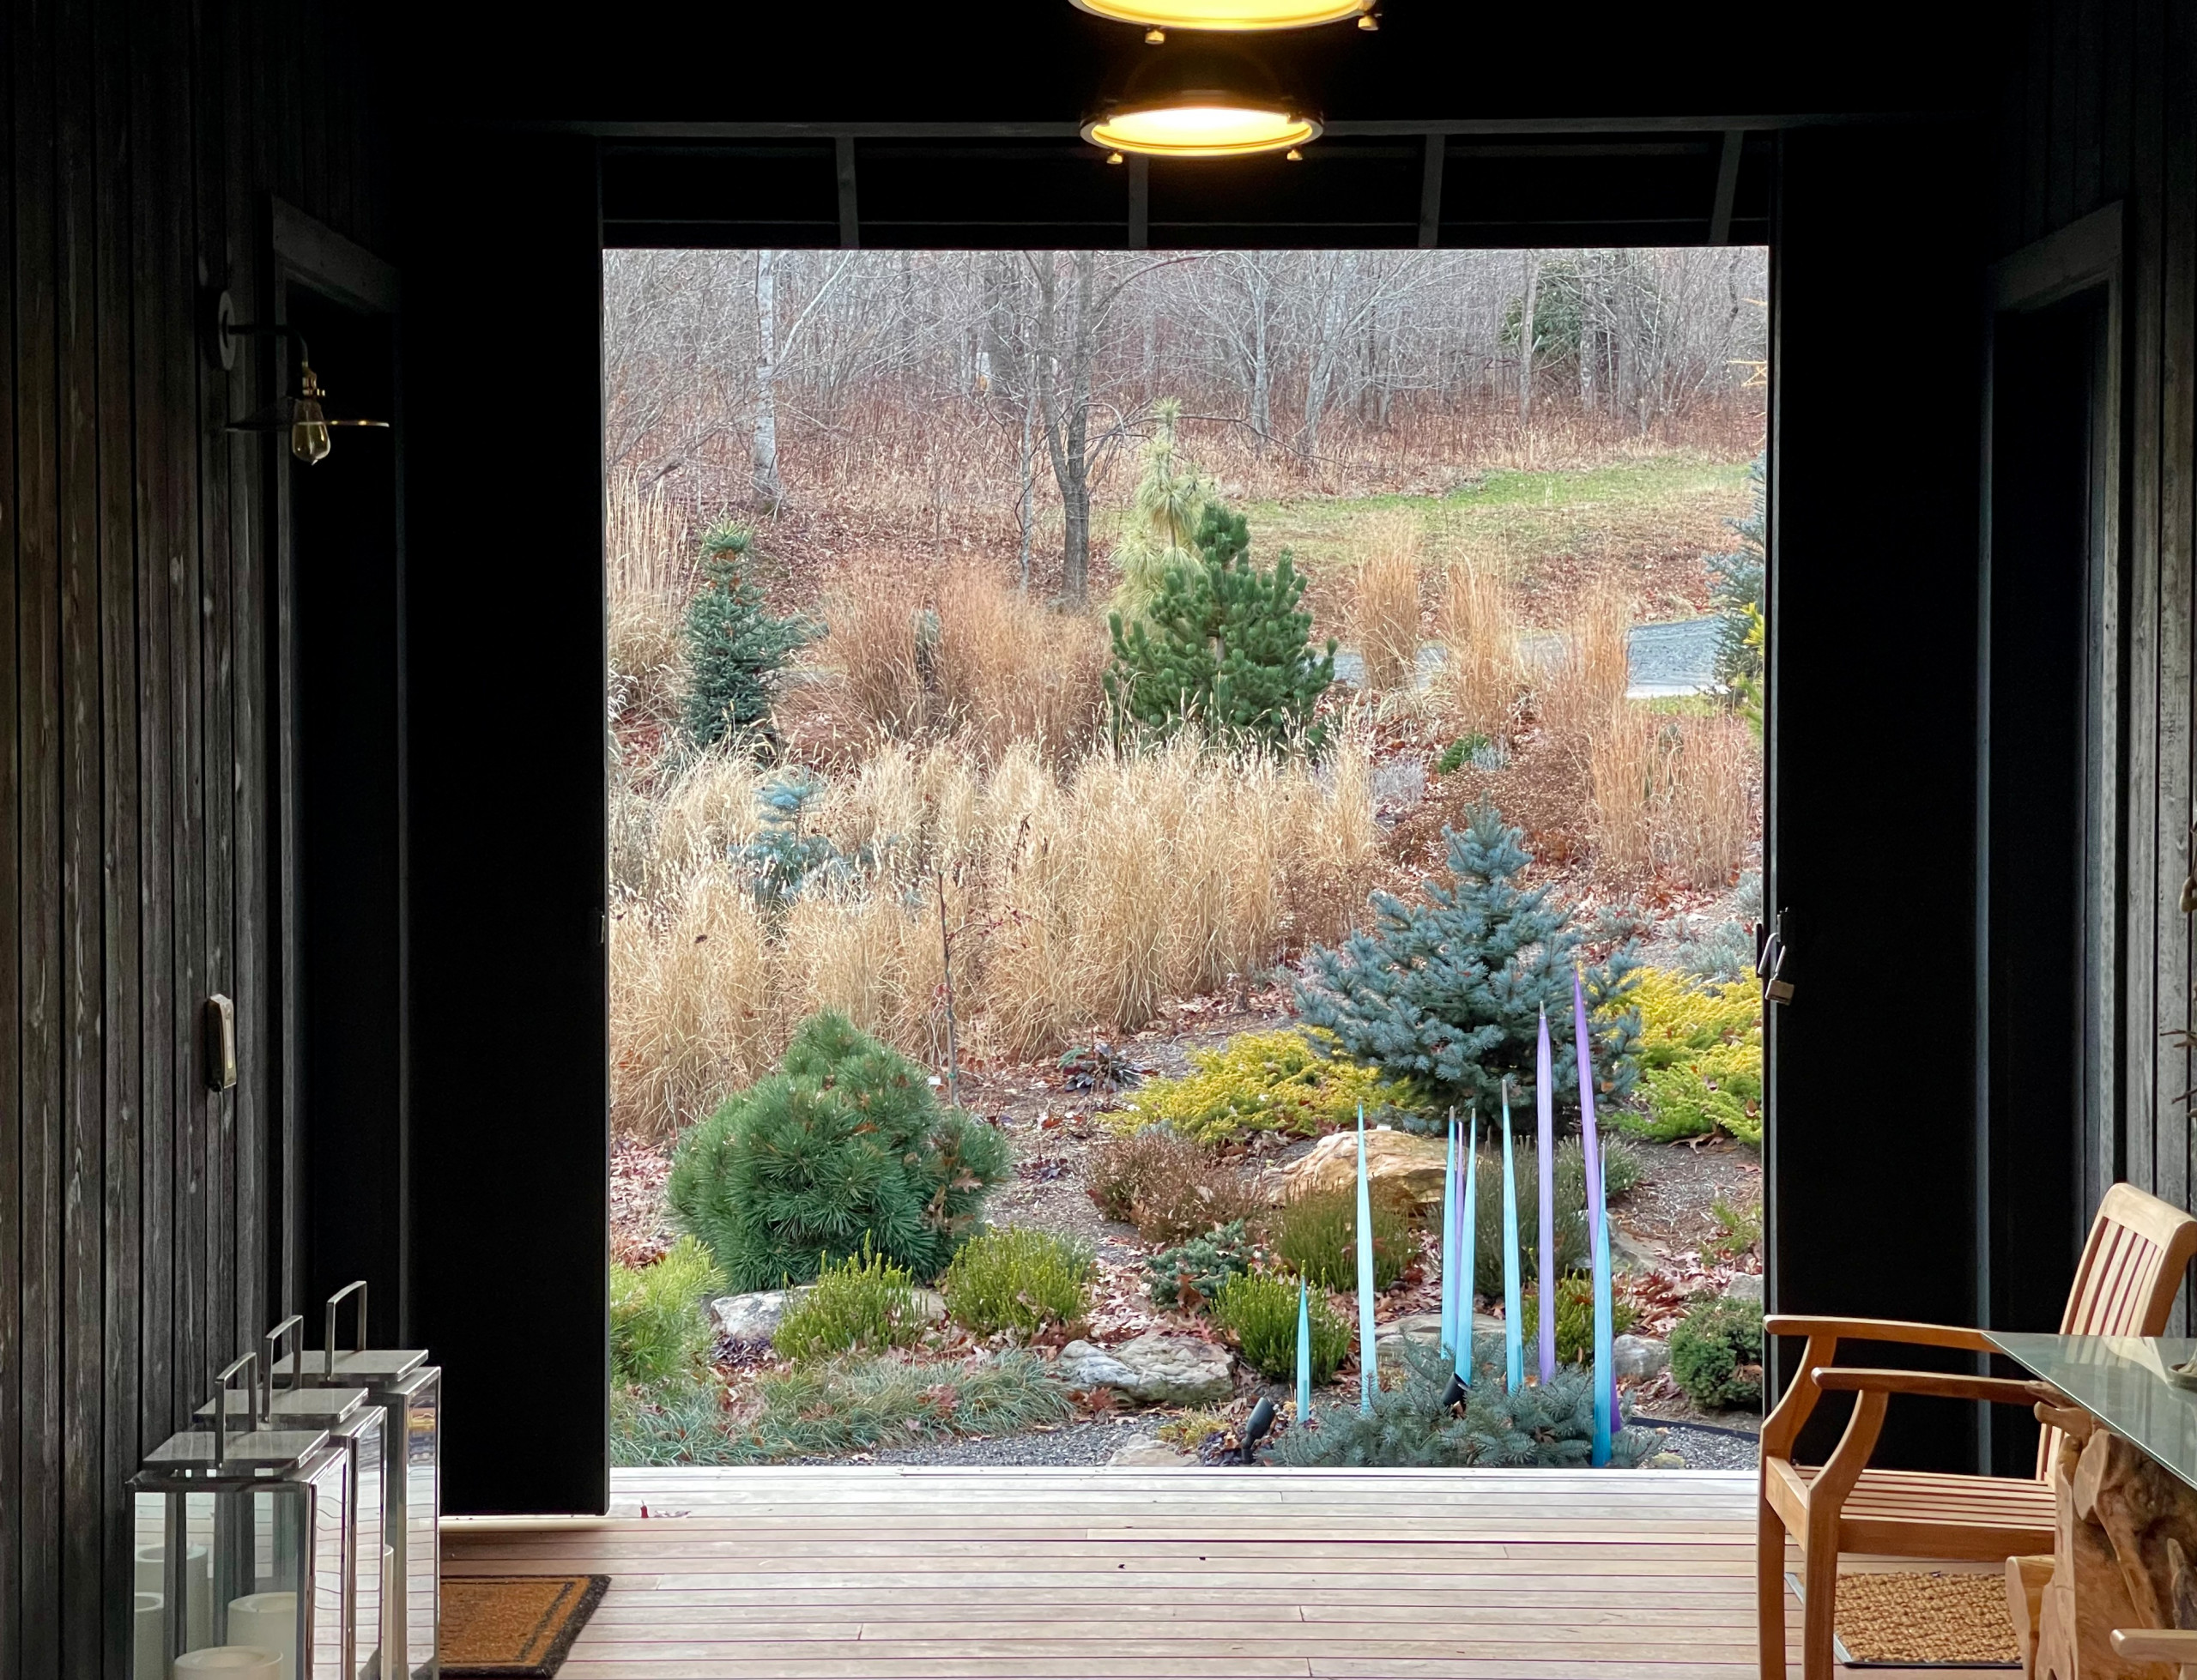 The Winter Garden As Seen From the Dogtrot